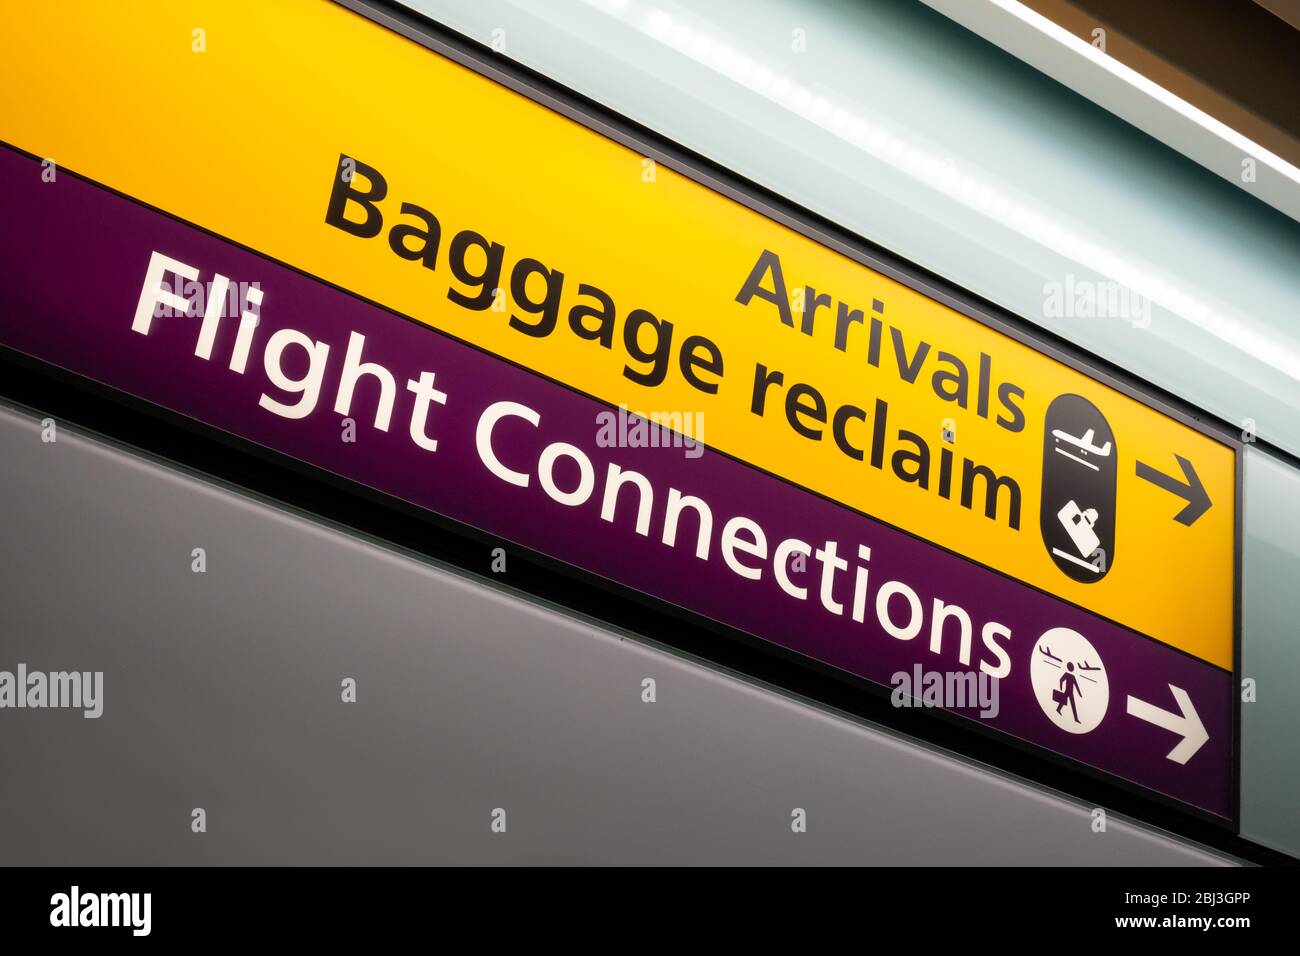 Arrivals Baggage Reclaim Flight Connections Sign at an Airport Terminal Stock Photo